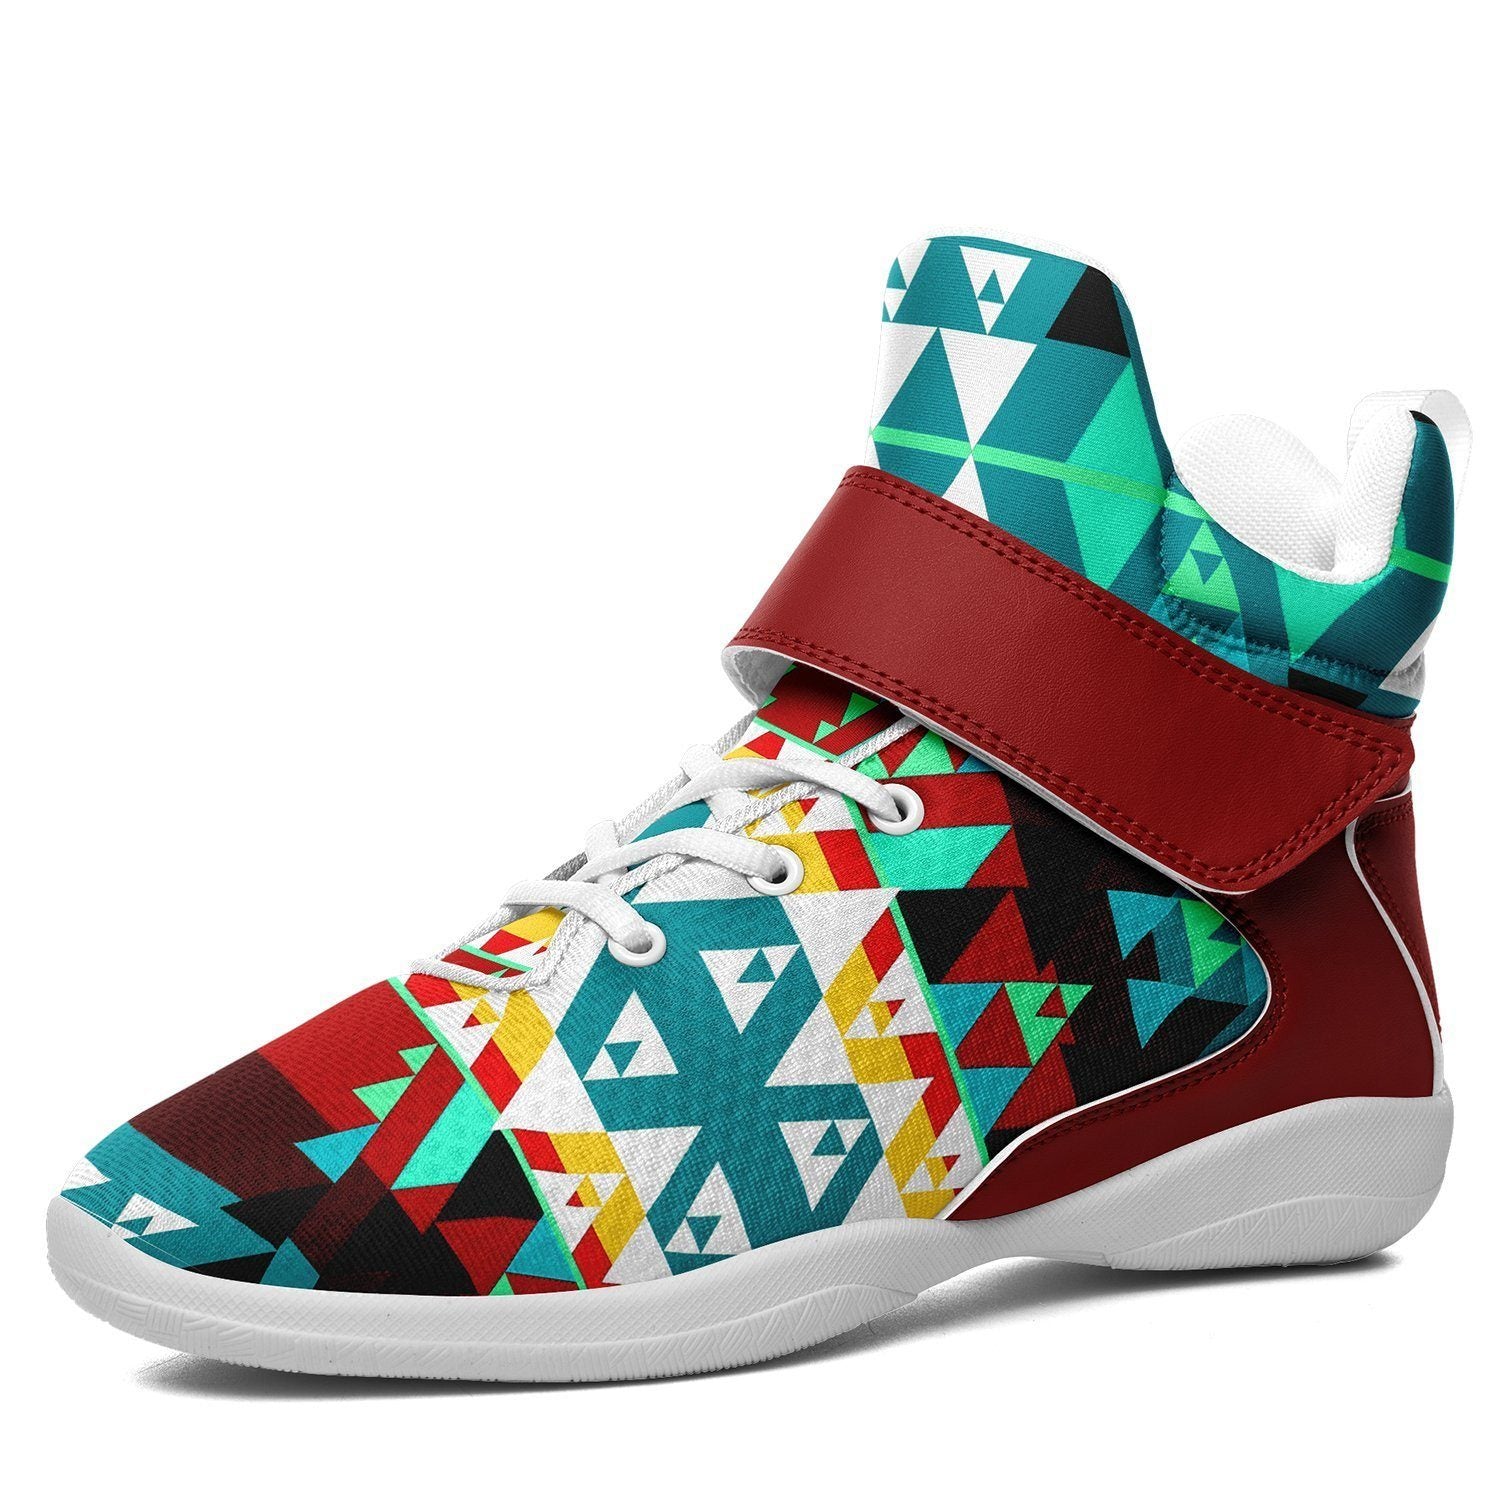 Writing on Stone Wheel Ipottaa Basketball / Sport High Top Shoes - White Sole 49 Dzine US Men 7 / EUR 40 White Sole with Dark Red Strap 